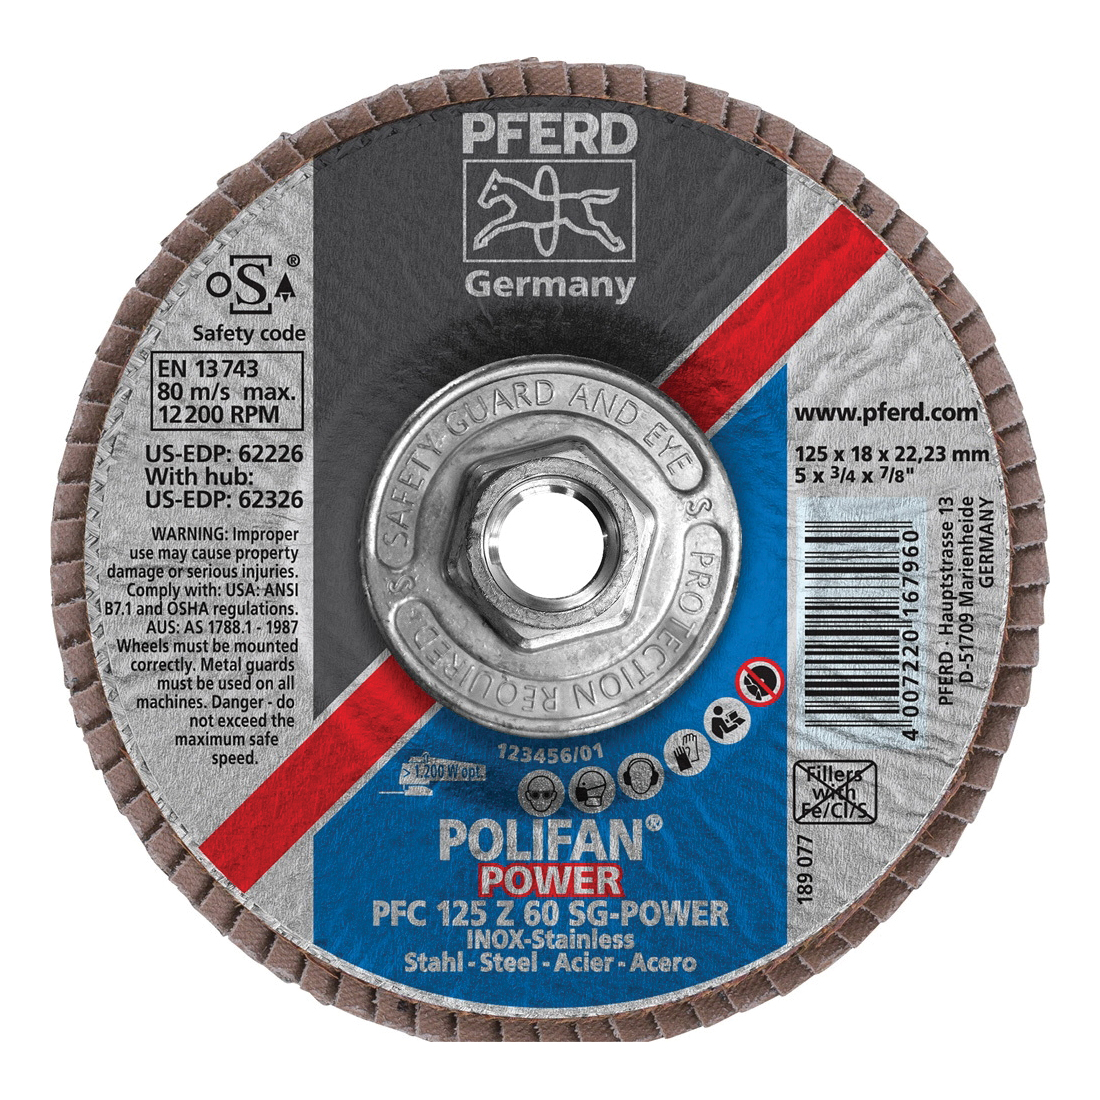 PFERD Polifan® 62326 Performance Line SG Z-Power Threaded Coated Abrasive Flap Disc, 5 in Dia, 60 Grit, Zirconia Alumina Abrasive, Type 29 Conical Disc